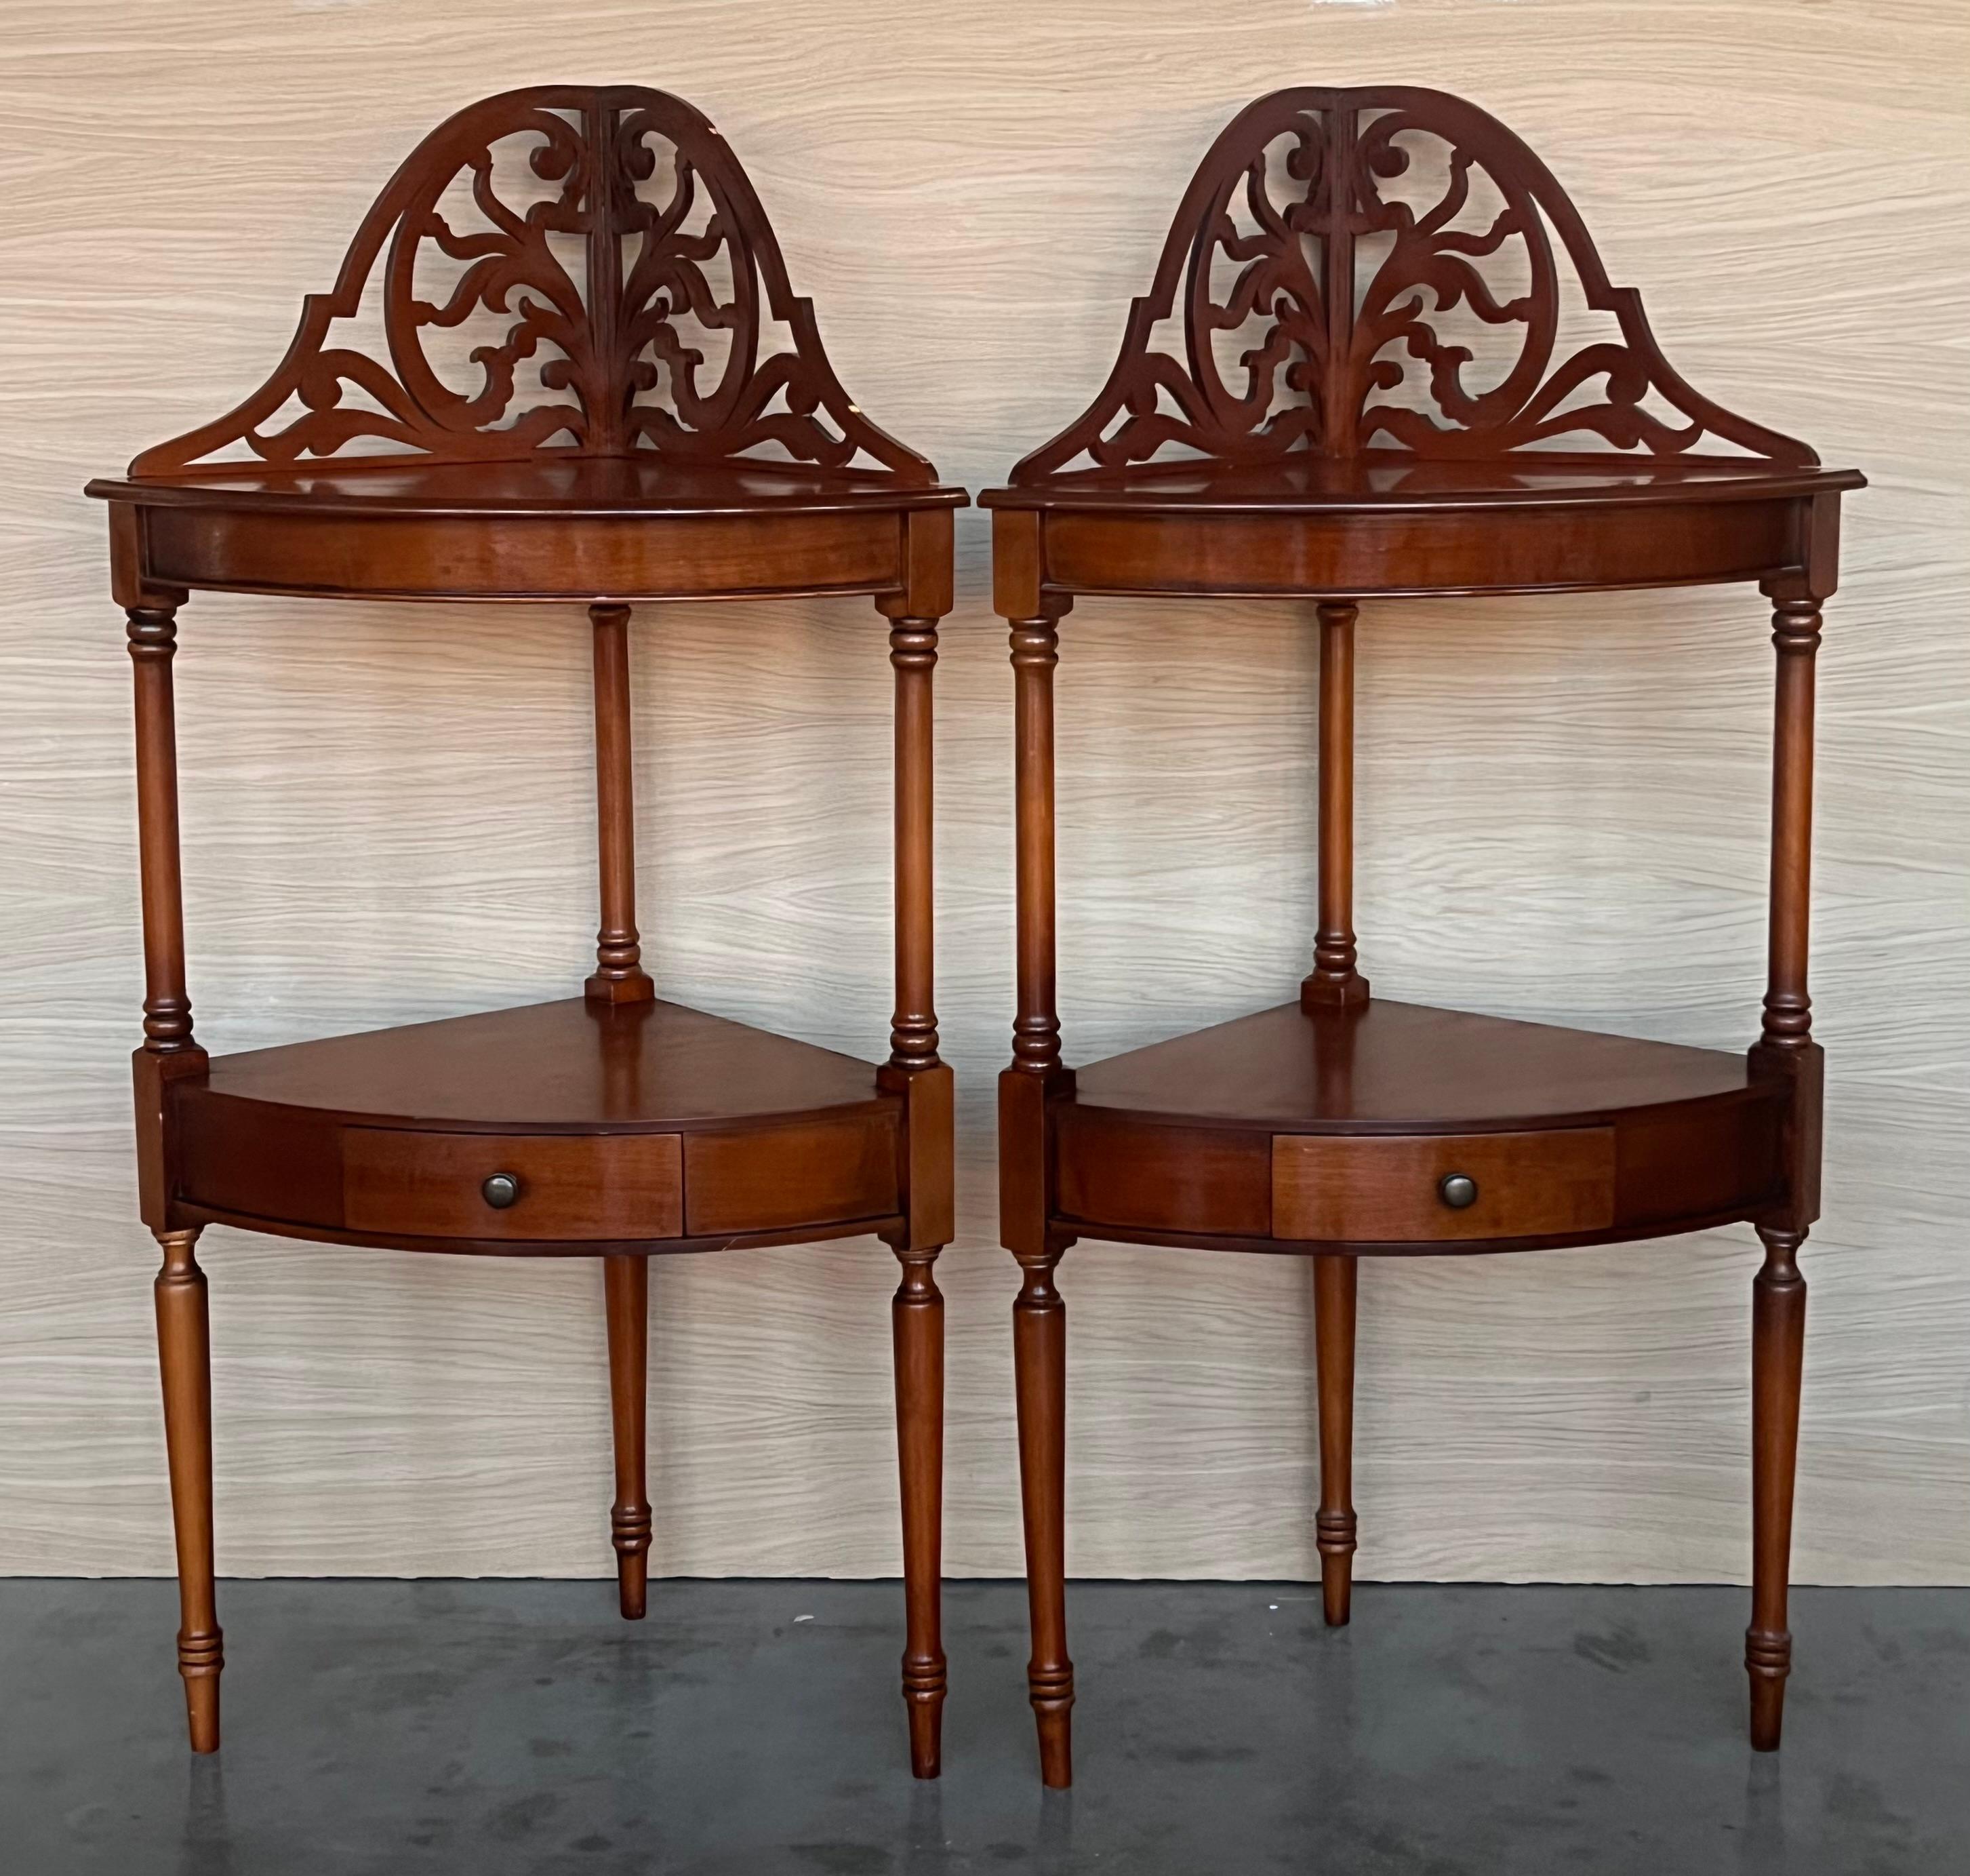 Early 20th Century Federal Style Mahogany Corner Etagere with Drawer In Good Condition For Sale In Miami, FL